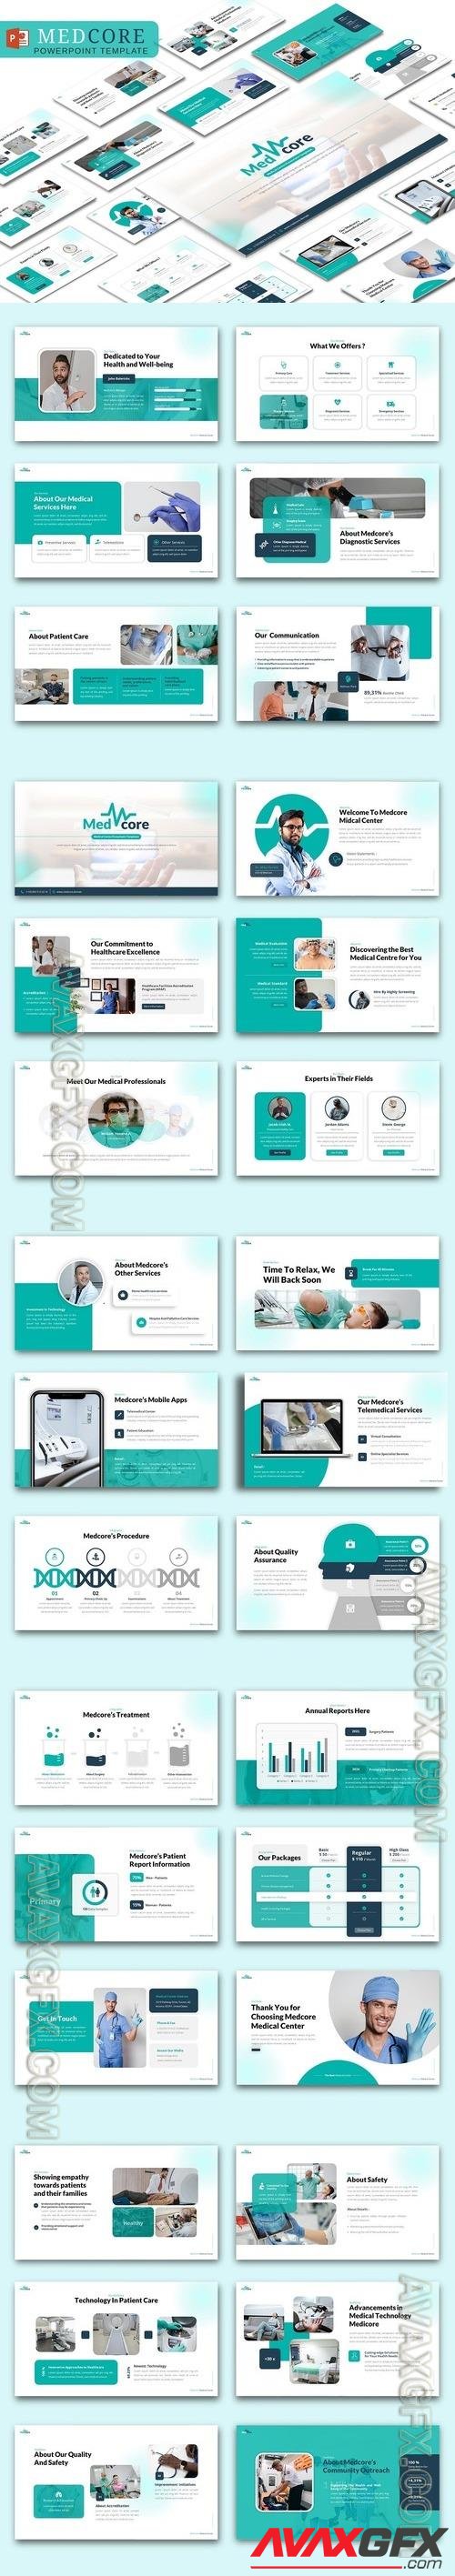 Medcore - Medical Centre PowerPoint Template